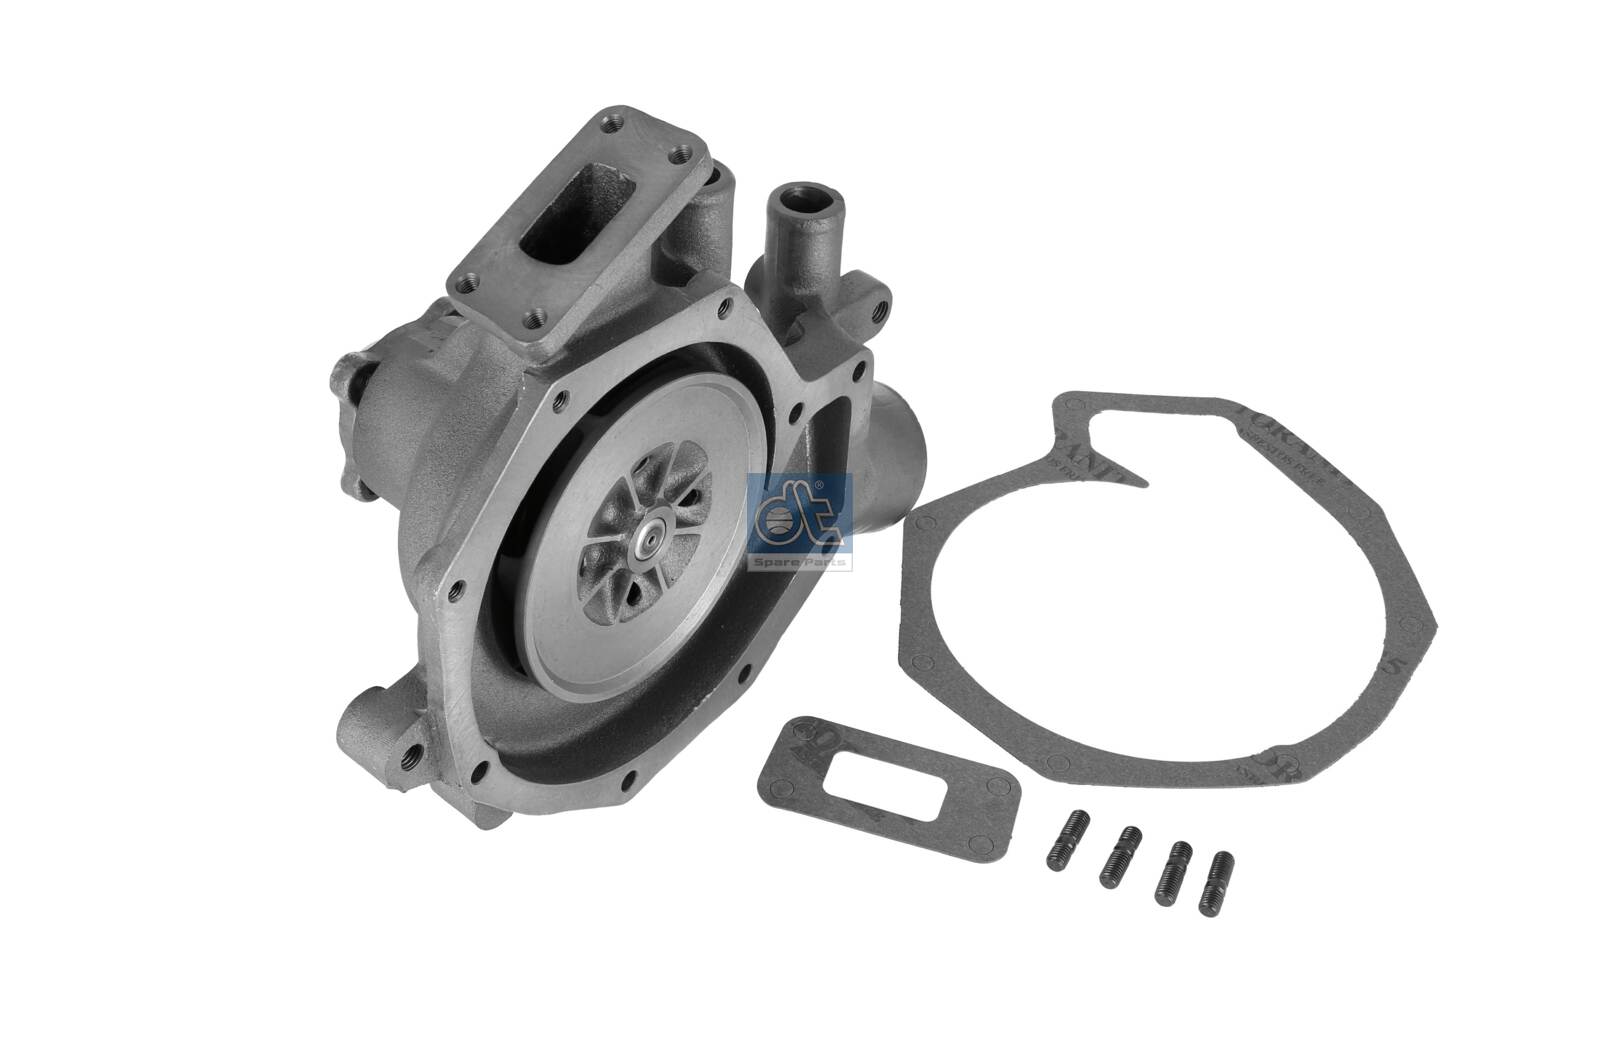 5.41006, Water Pump, engine cooling, DT Spare Parts, 0372896, 0681653, 0682258, 0682258A, 0682258R, 0682968, 0682968A, 0682968R, 0682980, 0682980A, 0682980R, 372896, 681653, 682258, 682258A, 682258R, 682968, 682968A, 682968R, 682980, 682980A, 682980R, 01500003, 062000116002, 08.120.0268.020, 100.152-00A, 12.350.035, 14-330682968, 19200104, 20160911602